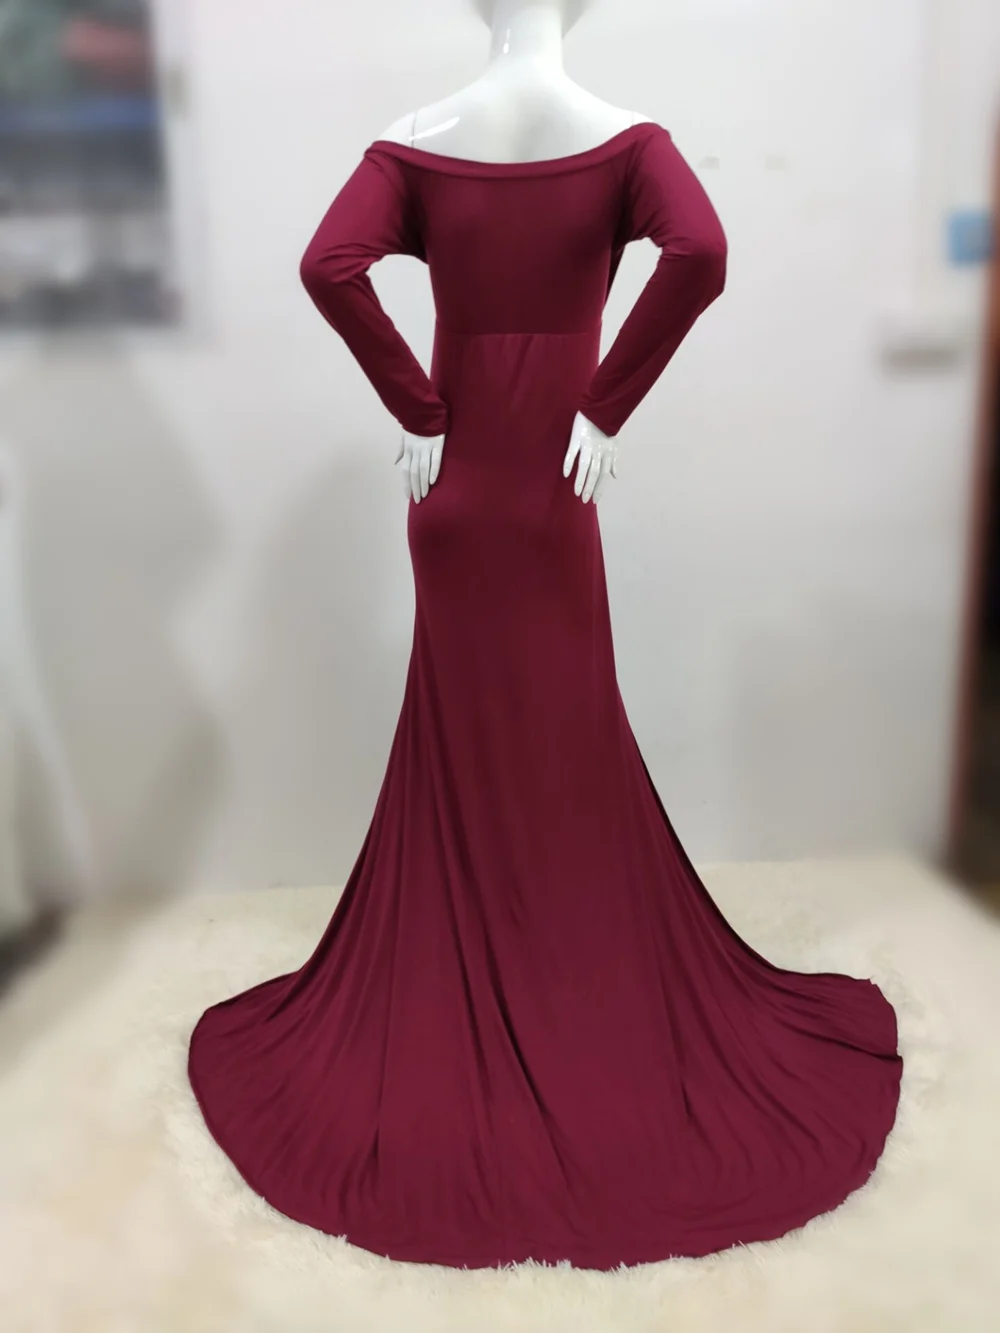 Sexy Shoulderless Maternity Dresses For Photo Shoot Maxi Gown Split Side Women Pregnant Photography Props Long Pregnancy Dress (24)